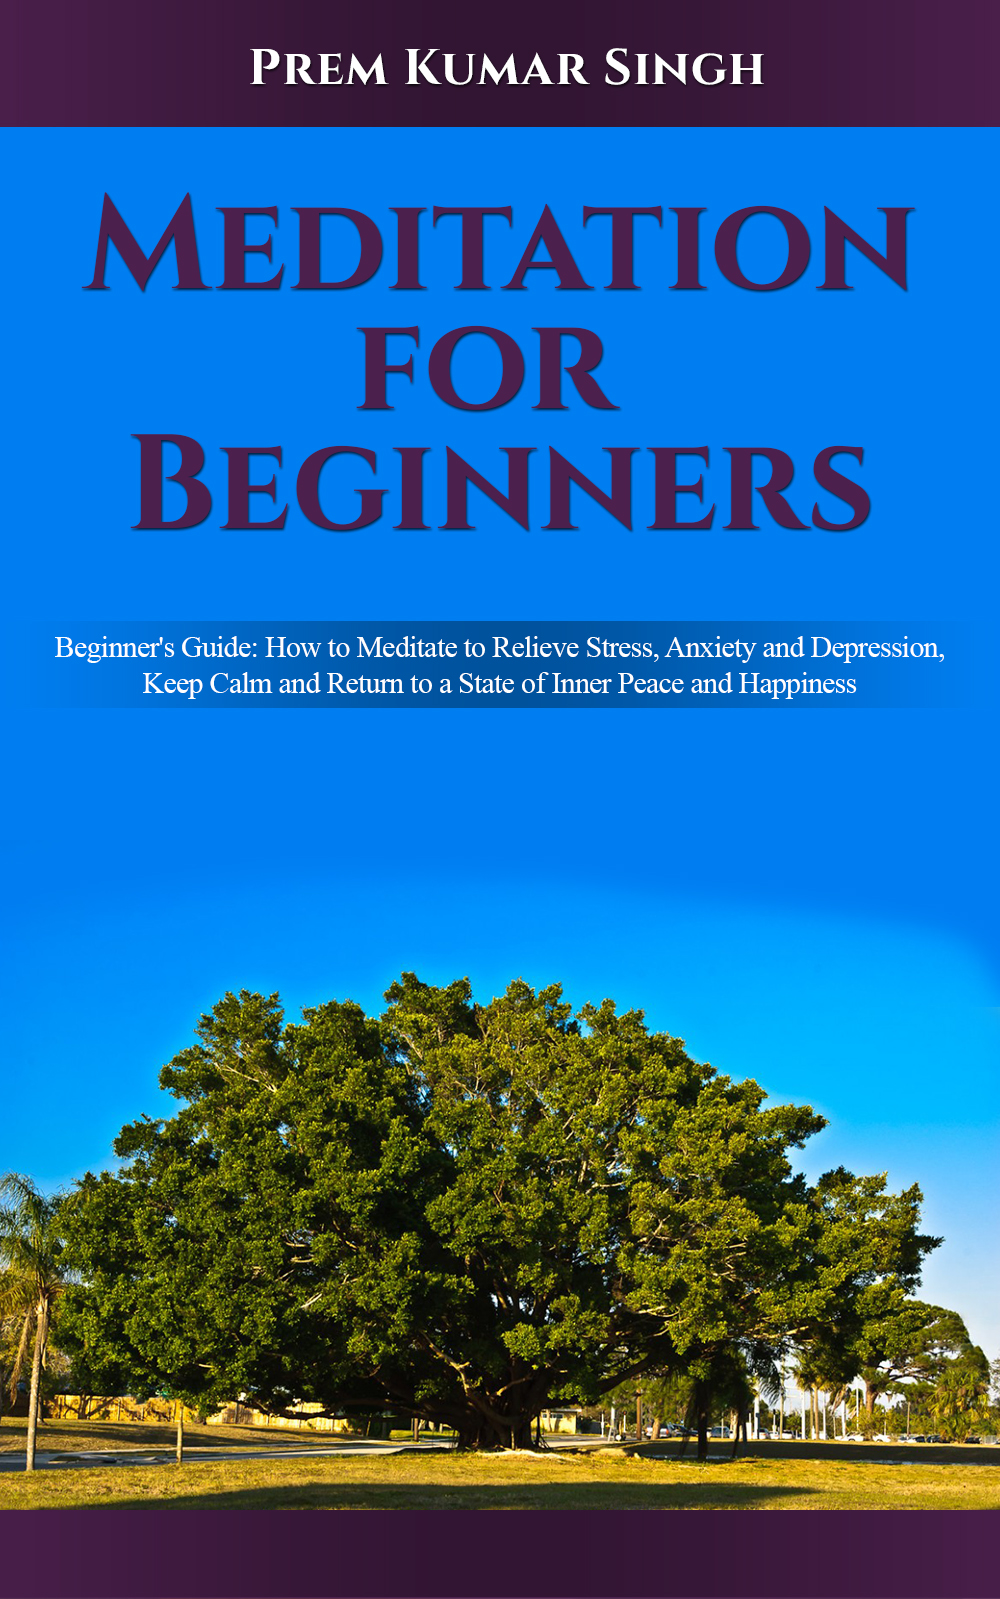 FREE: Meditation for Beginners: Beginner’s Guide: How to Meditate to Relieve Stress, Anxiety and Depression, Keep Calm and Return to a State of Inner Peace and Happiness by Prem Kumar Singh